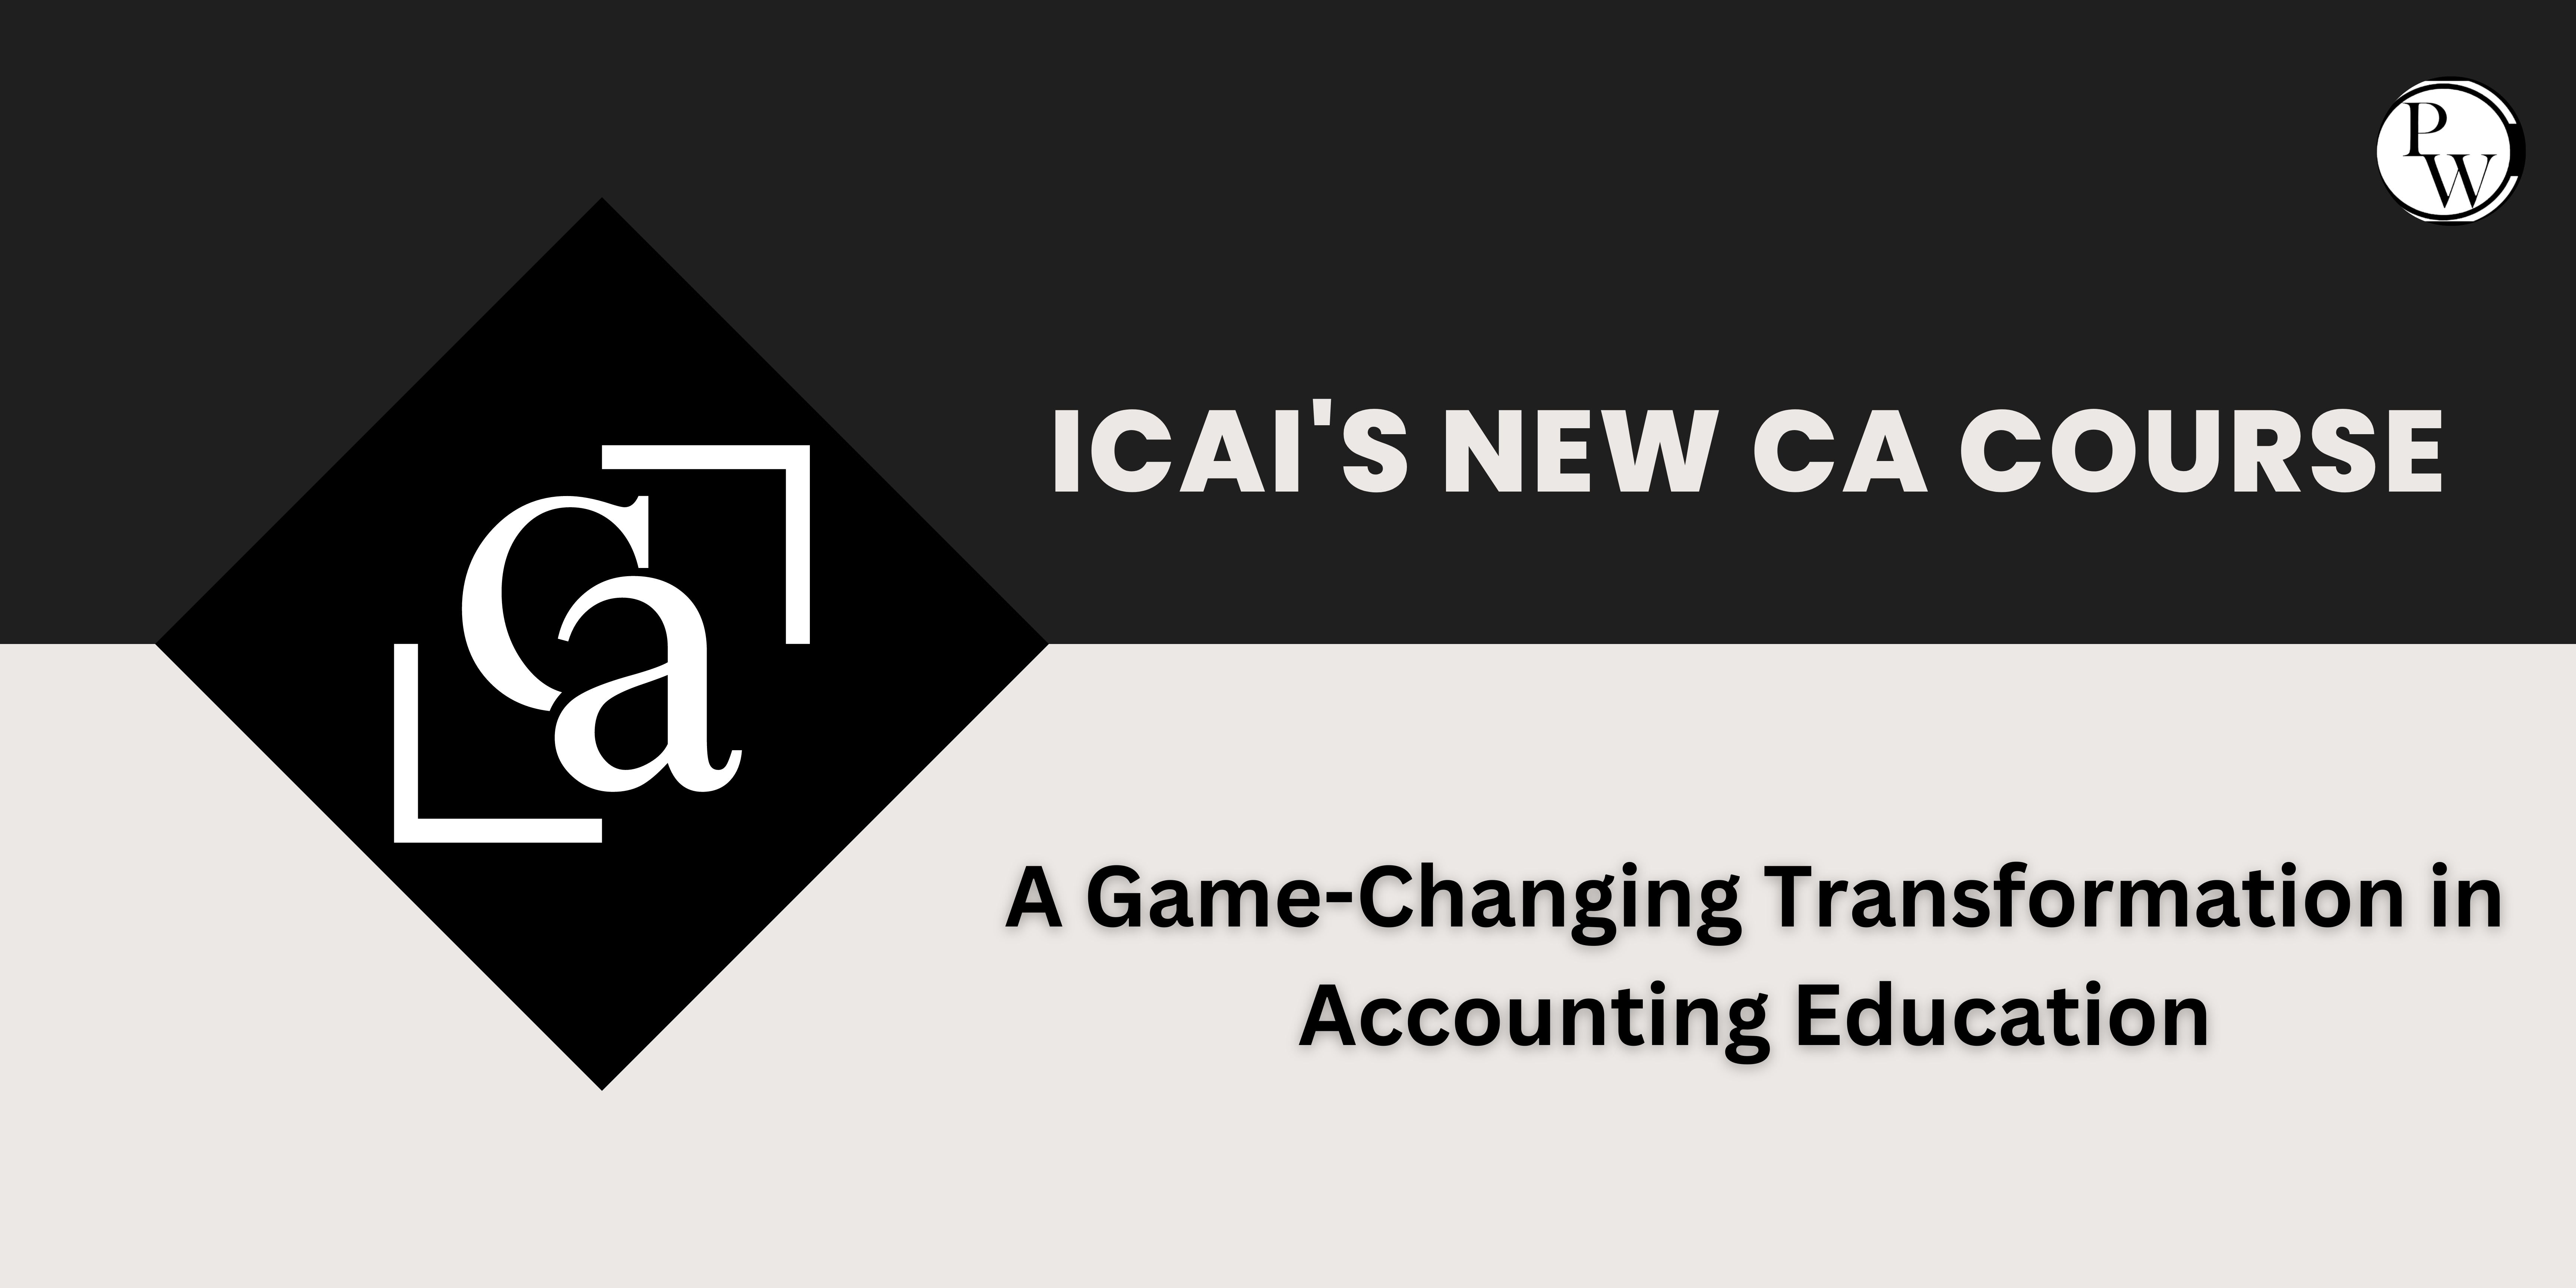 ICAI's New CA Course: A Game-Changing Transformation in Accounting Education | Education